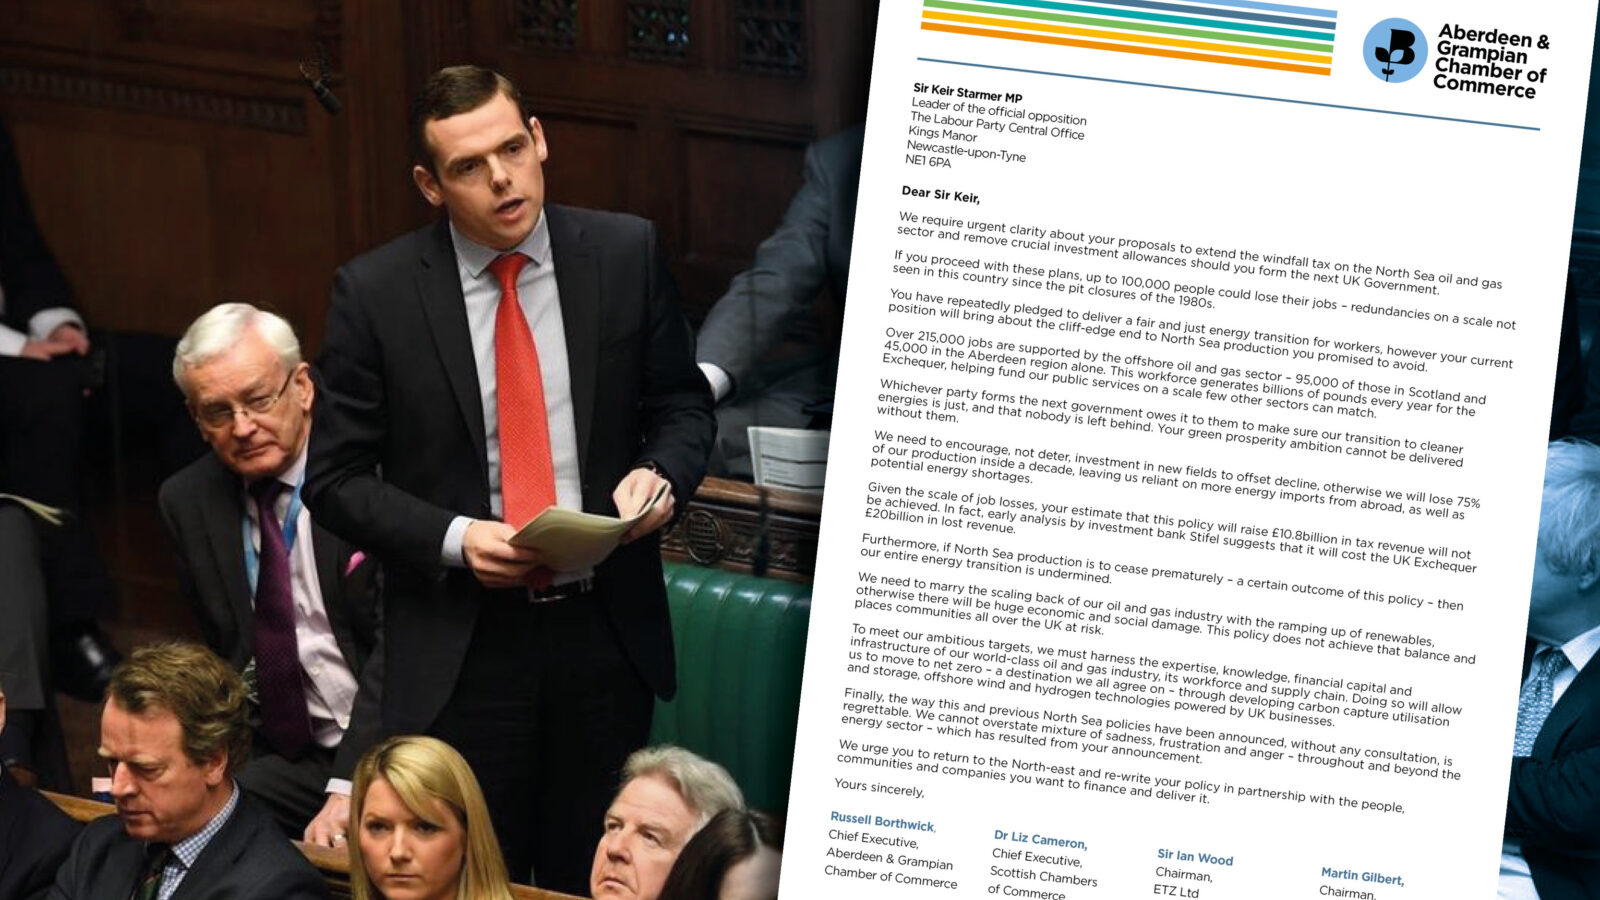 Chamber letter sparks heated clash in House of Commons